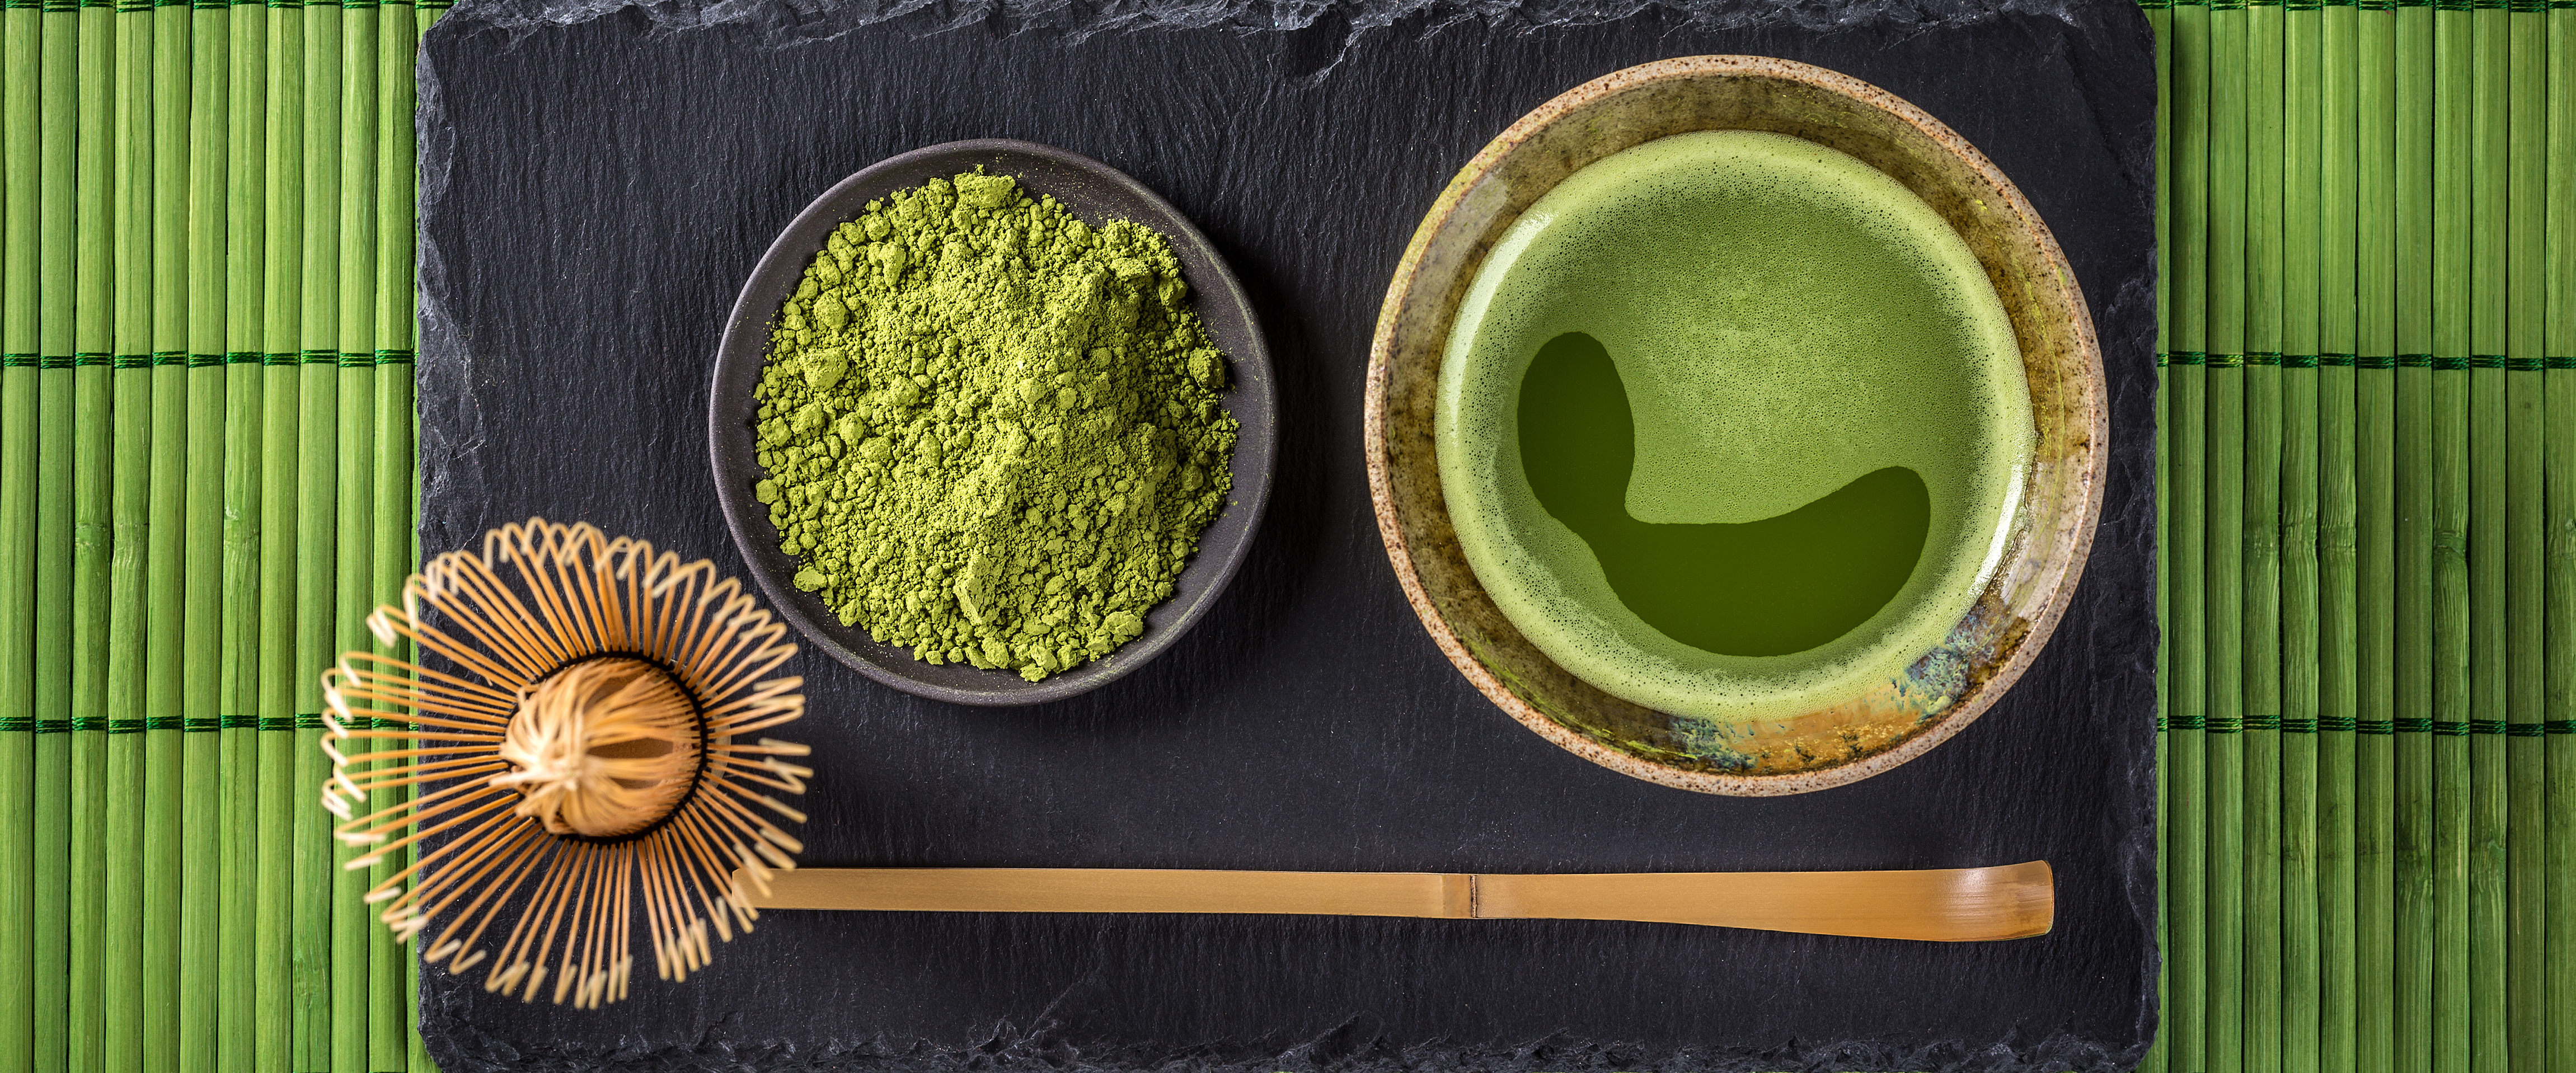 How to Make the Best Matcha